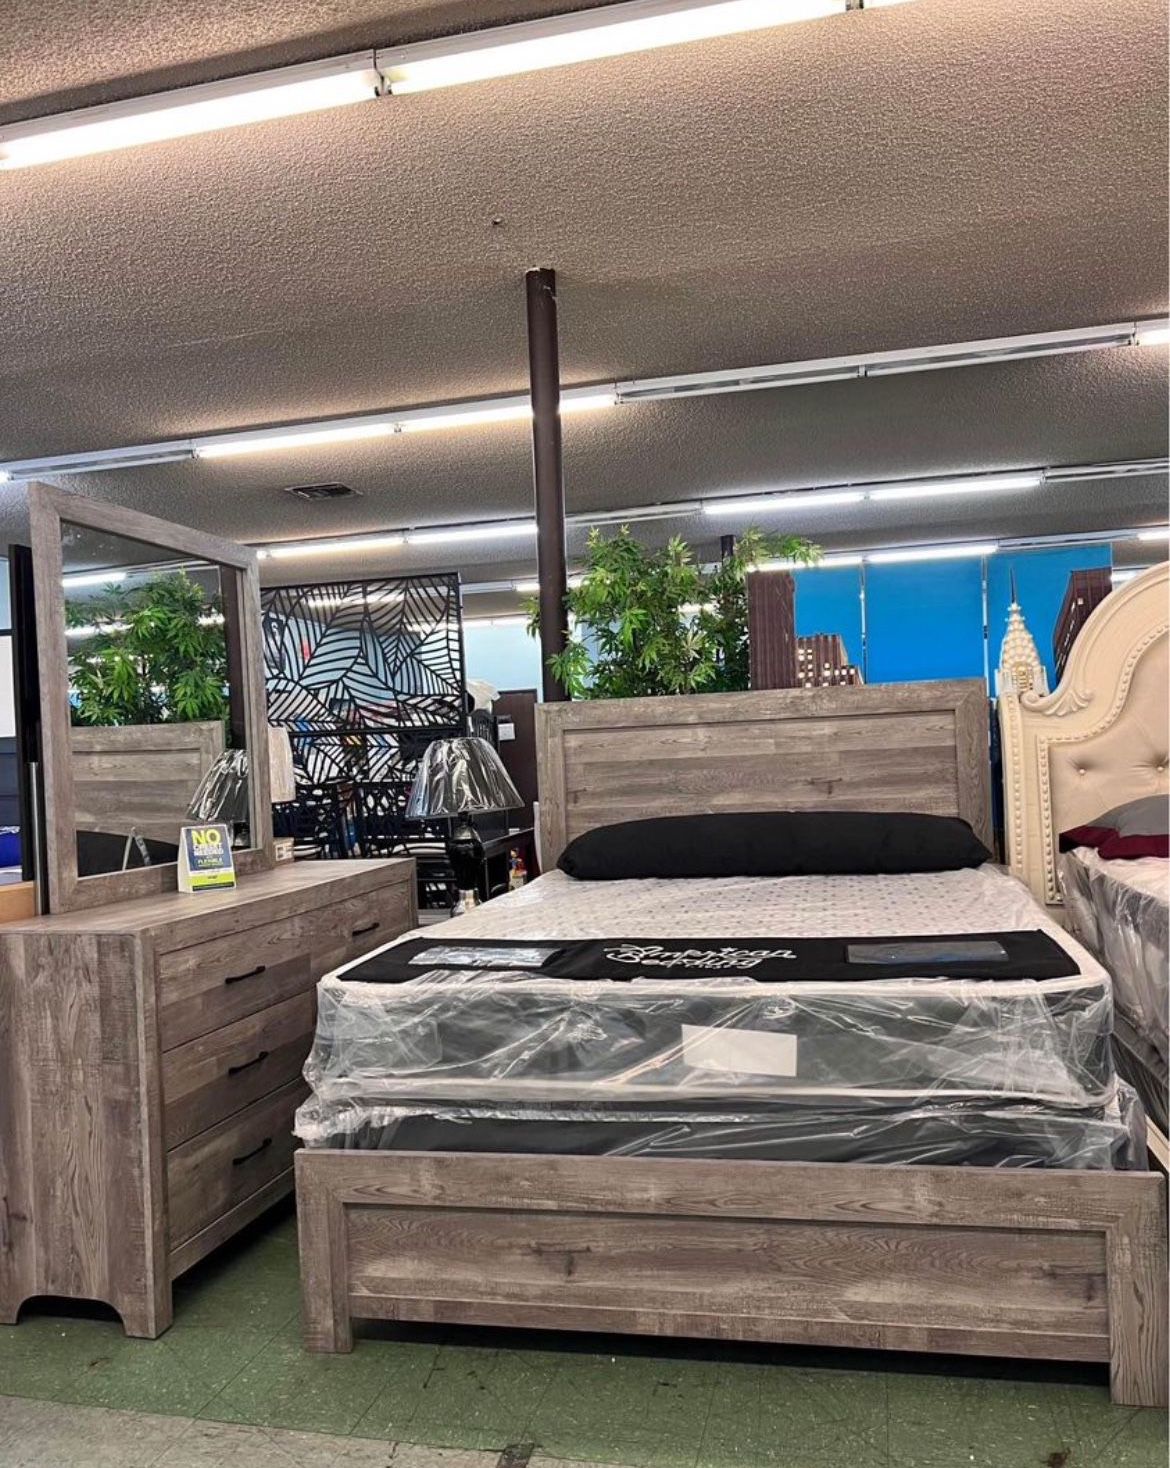 🔥Flash Deal🔥Queen Bed Frame + Dresser + Mirror + Nightstand Only $499, Finance Available 